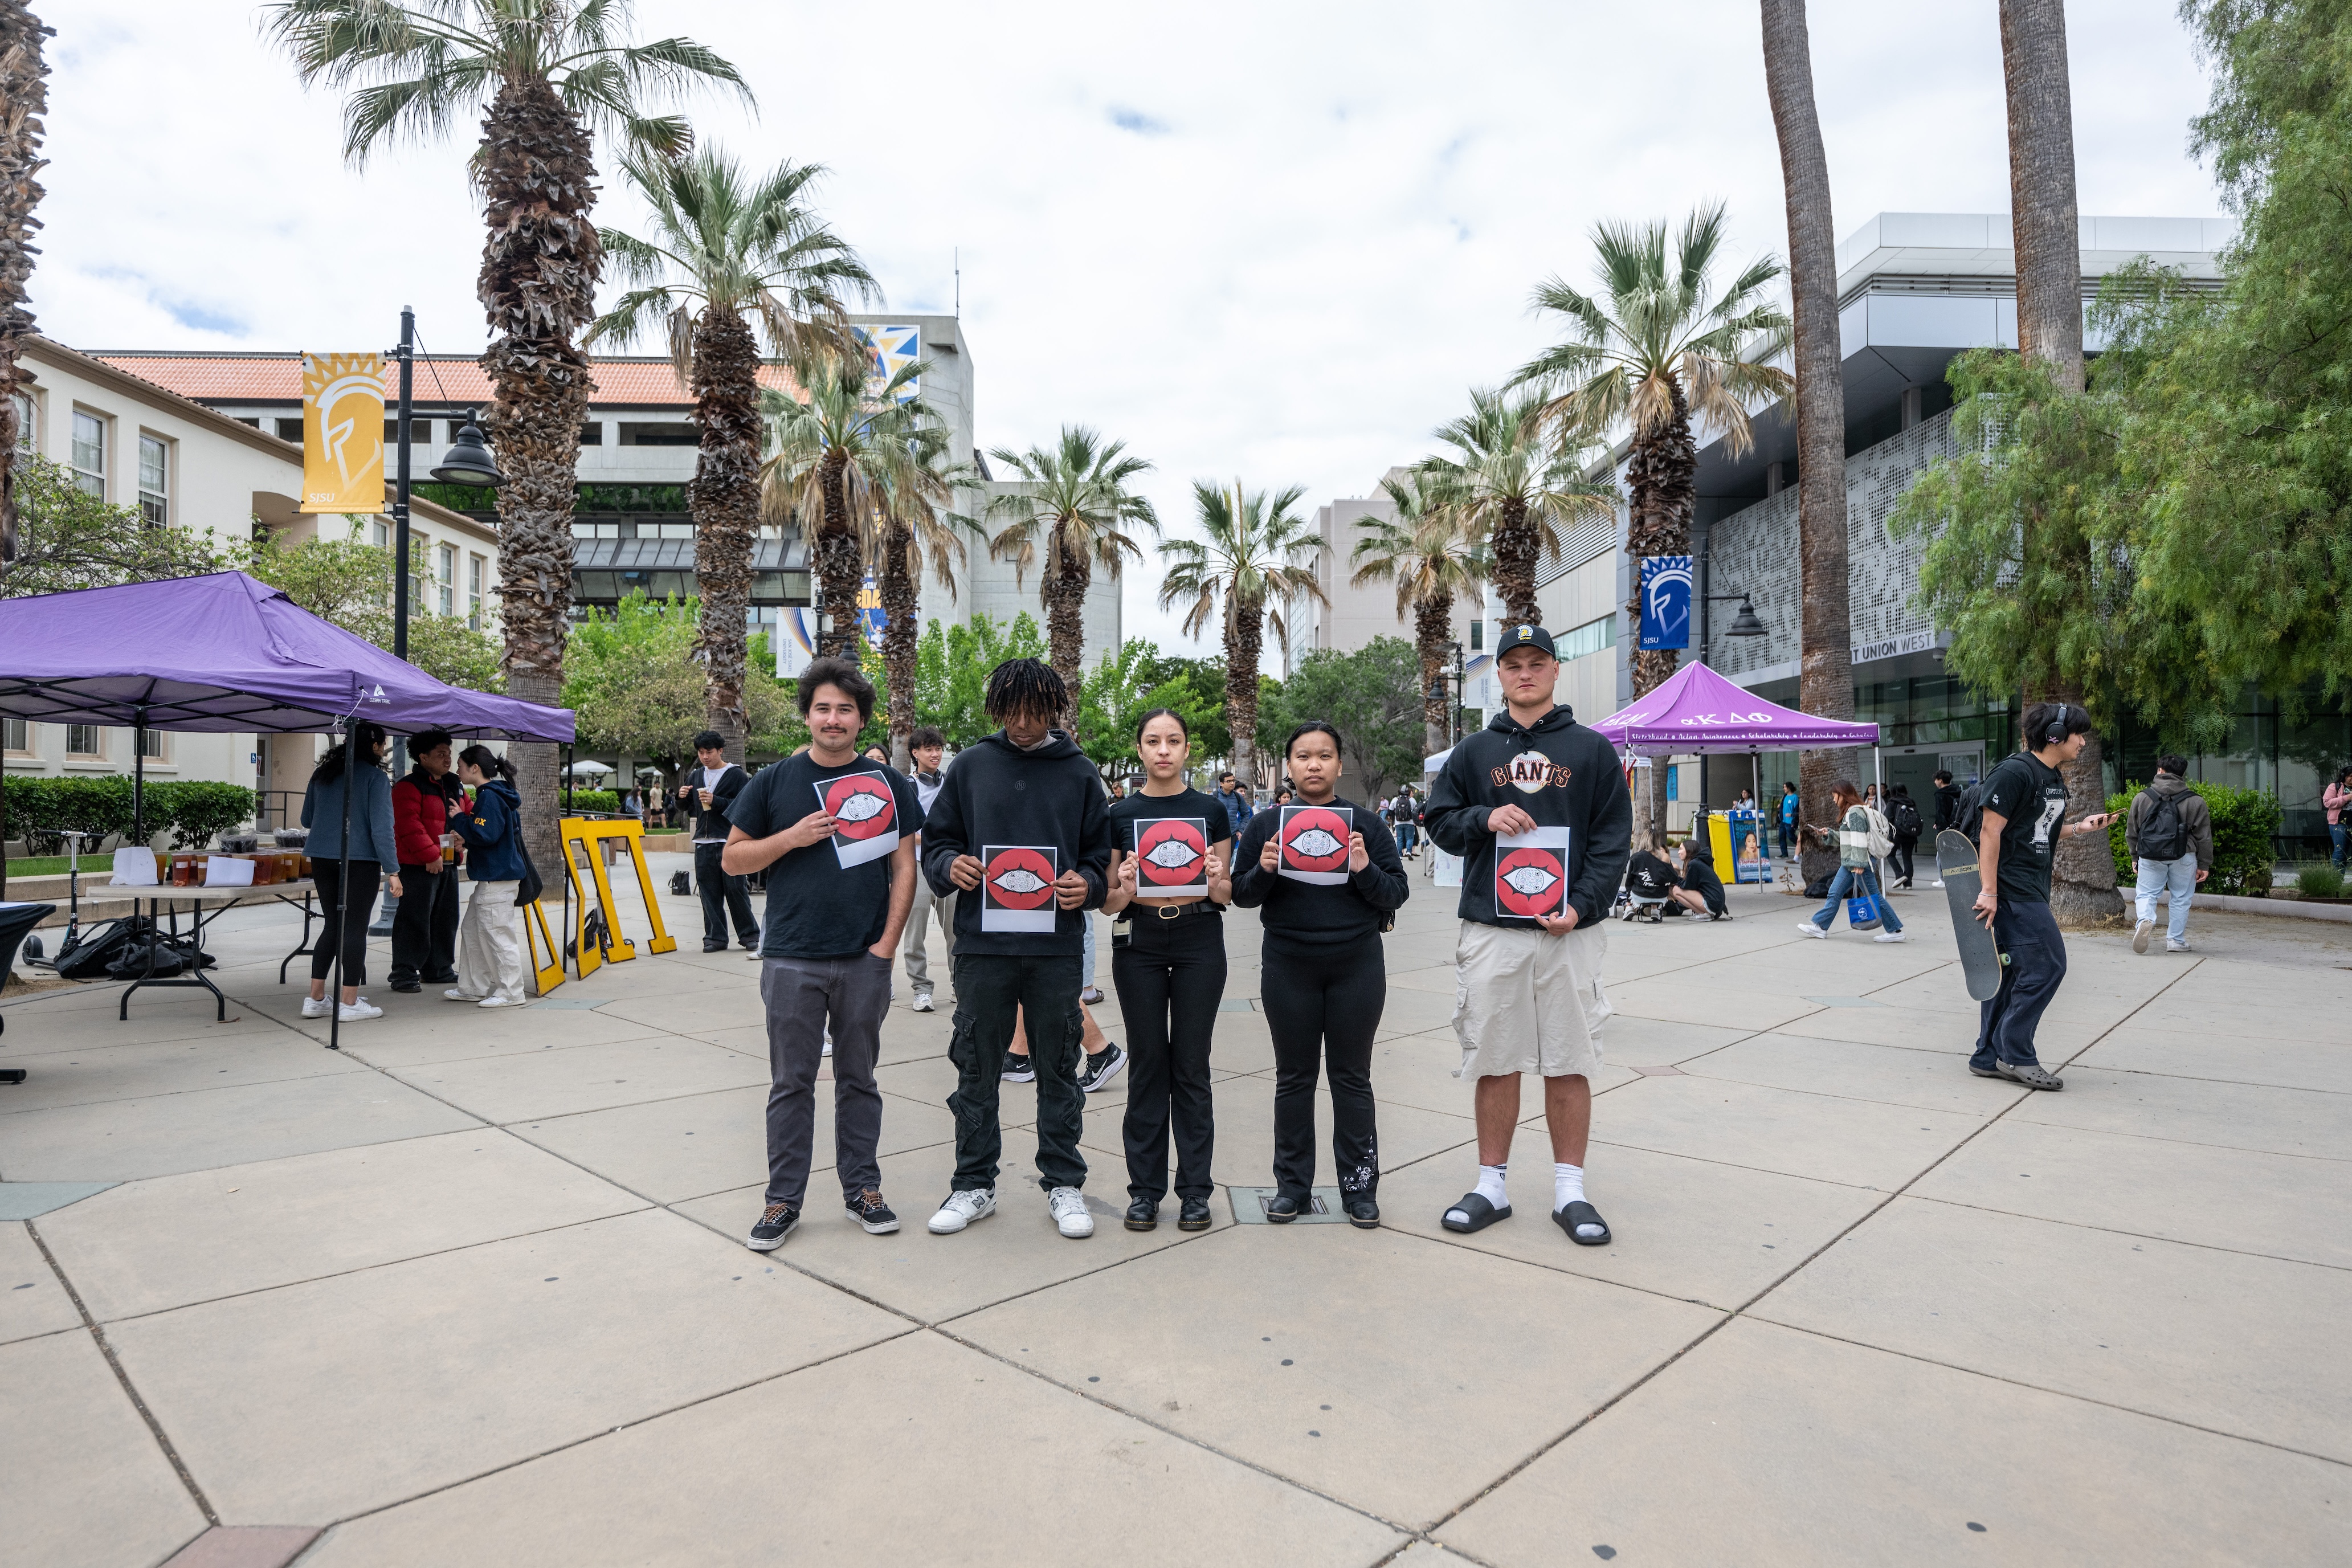 5 people standing on paseo holding 1984 graphics with palm trees behind them on a cloudy day